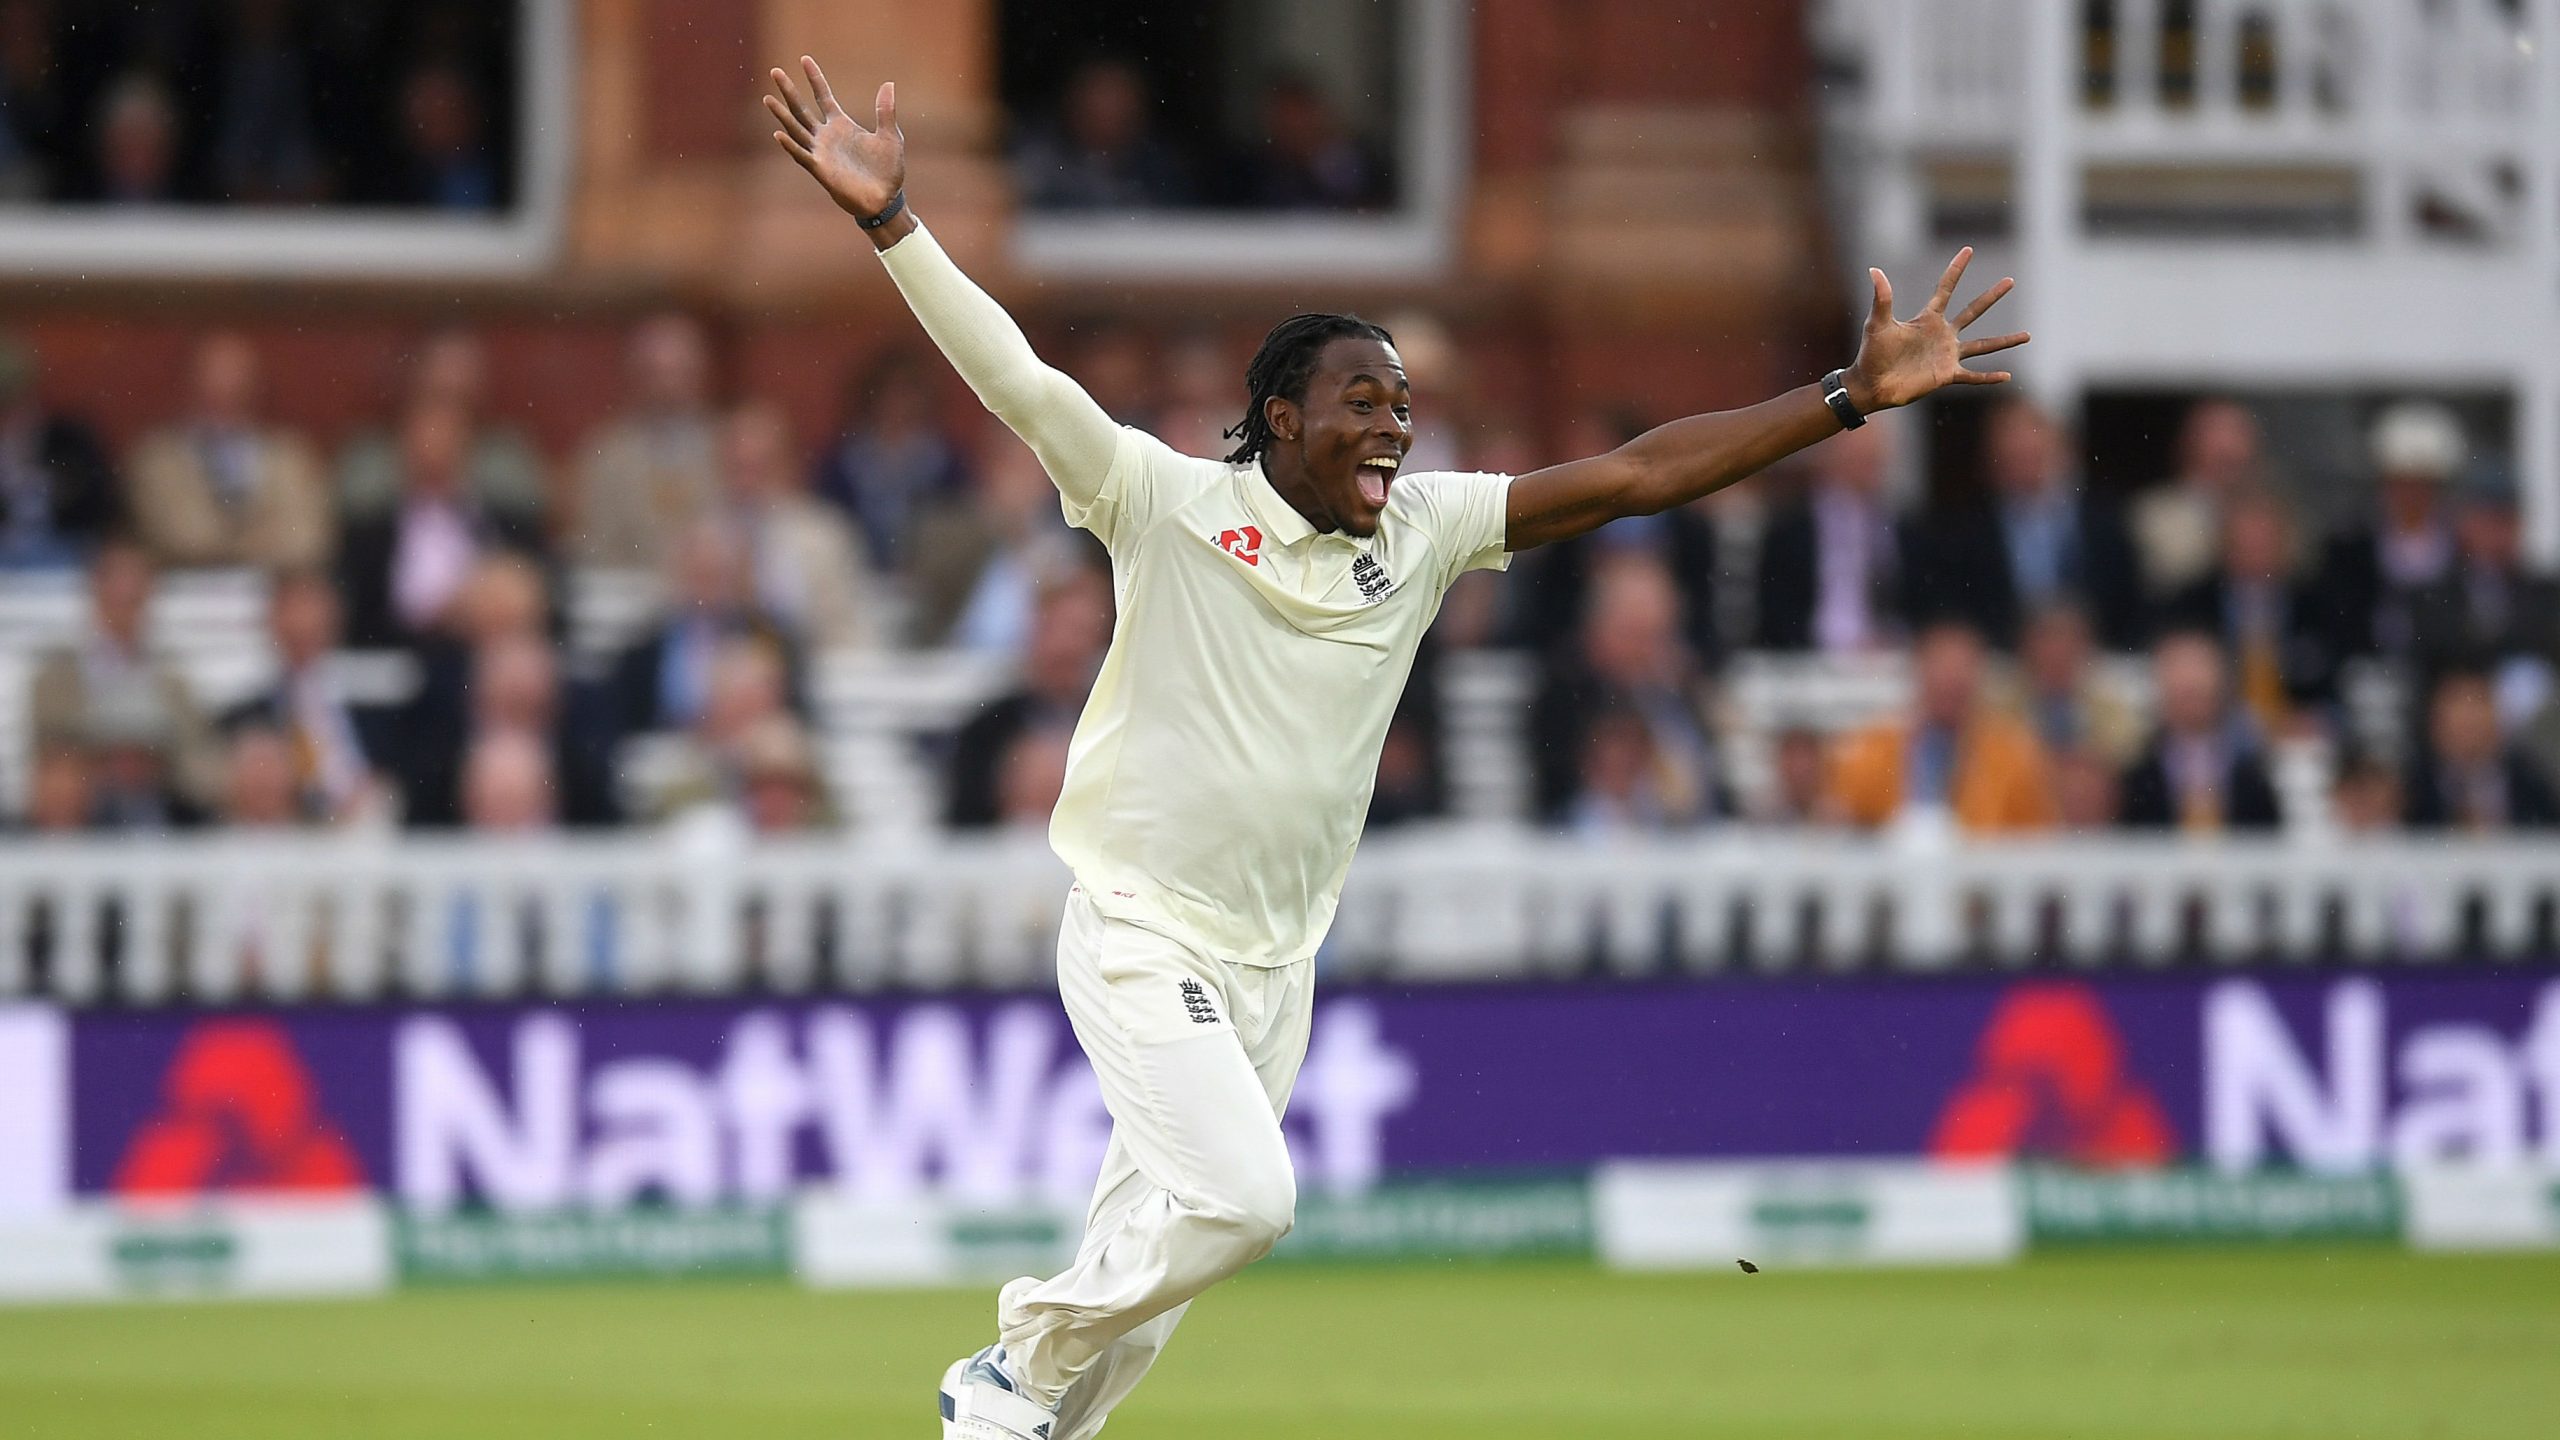 “Tough One To Take” – Jofra Archer Opens Up On Missing Out The Ashes